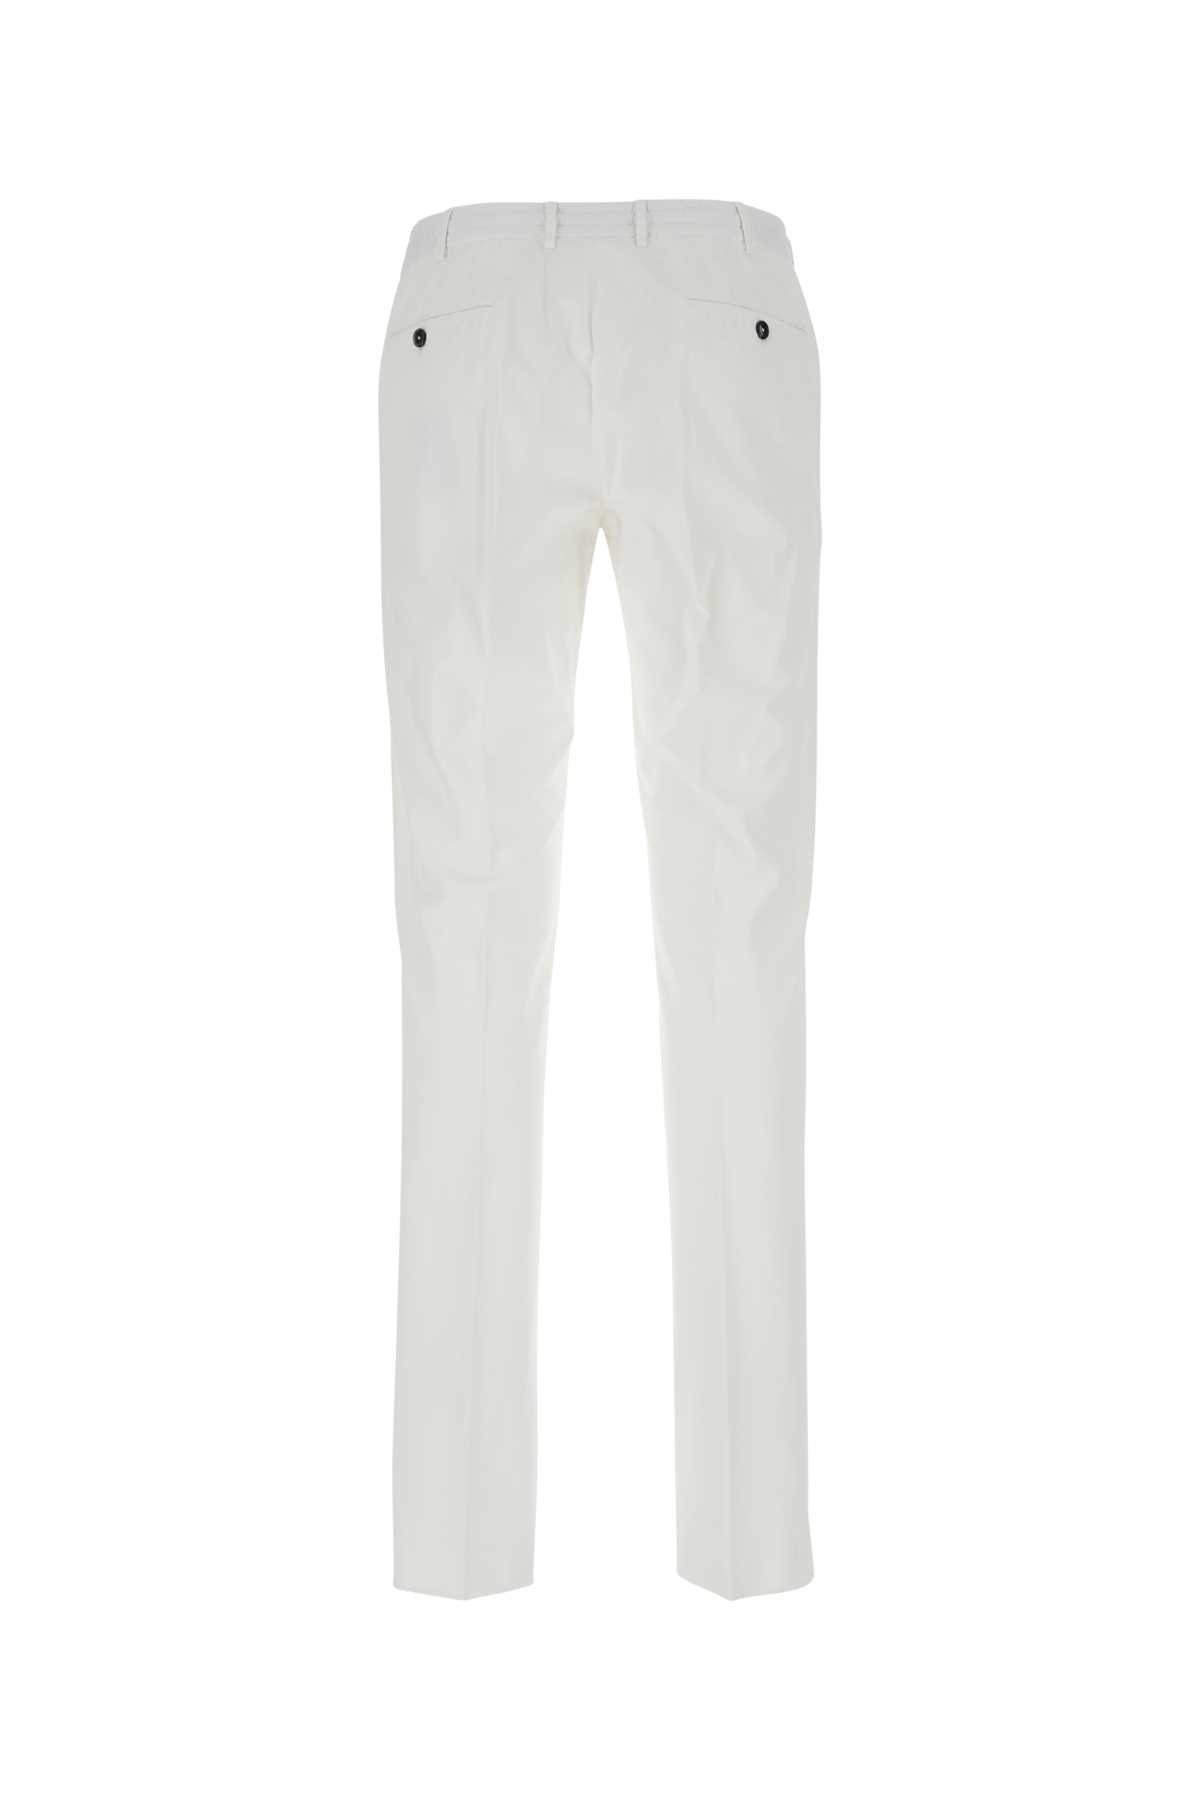 Pt01 White Stretch Cotton Pant In Y010